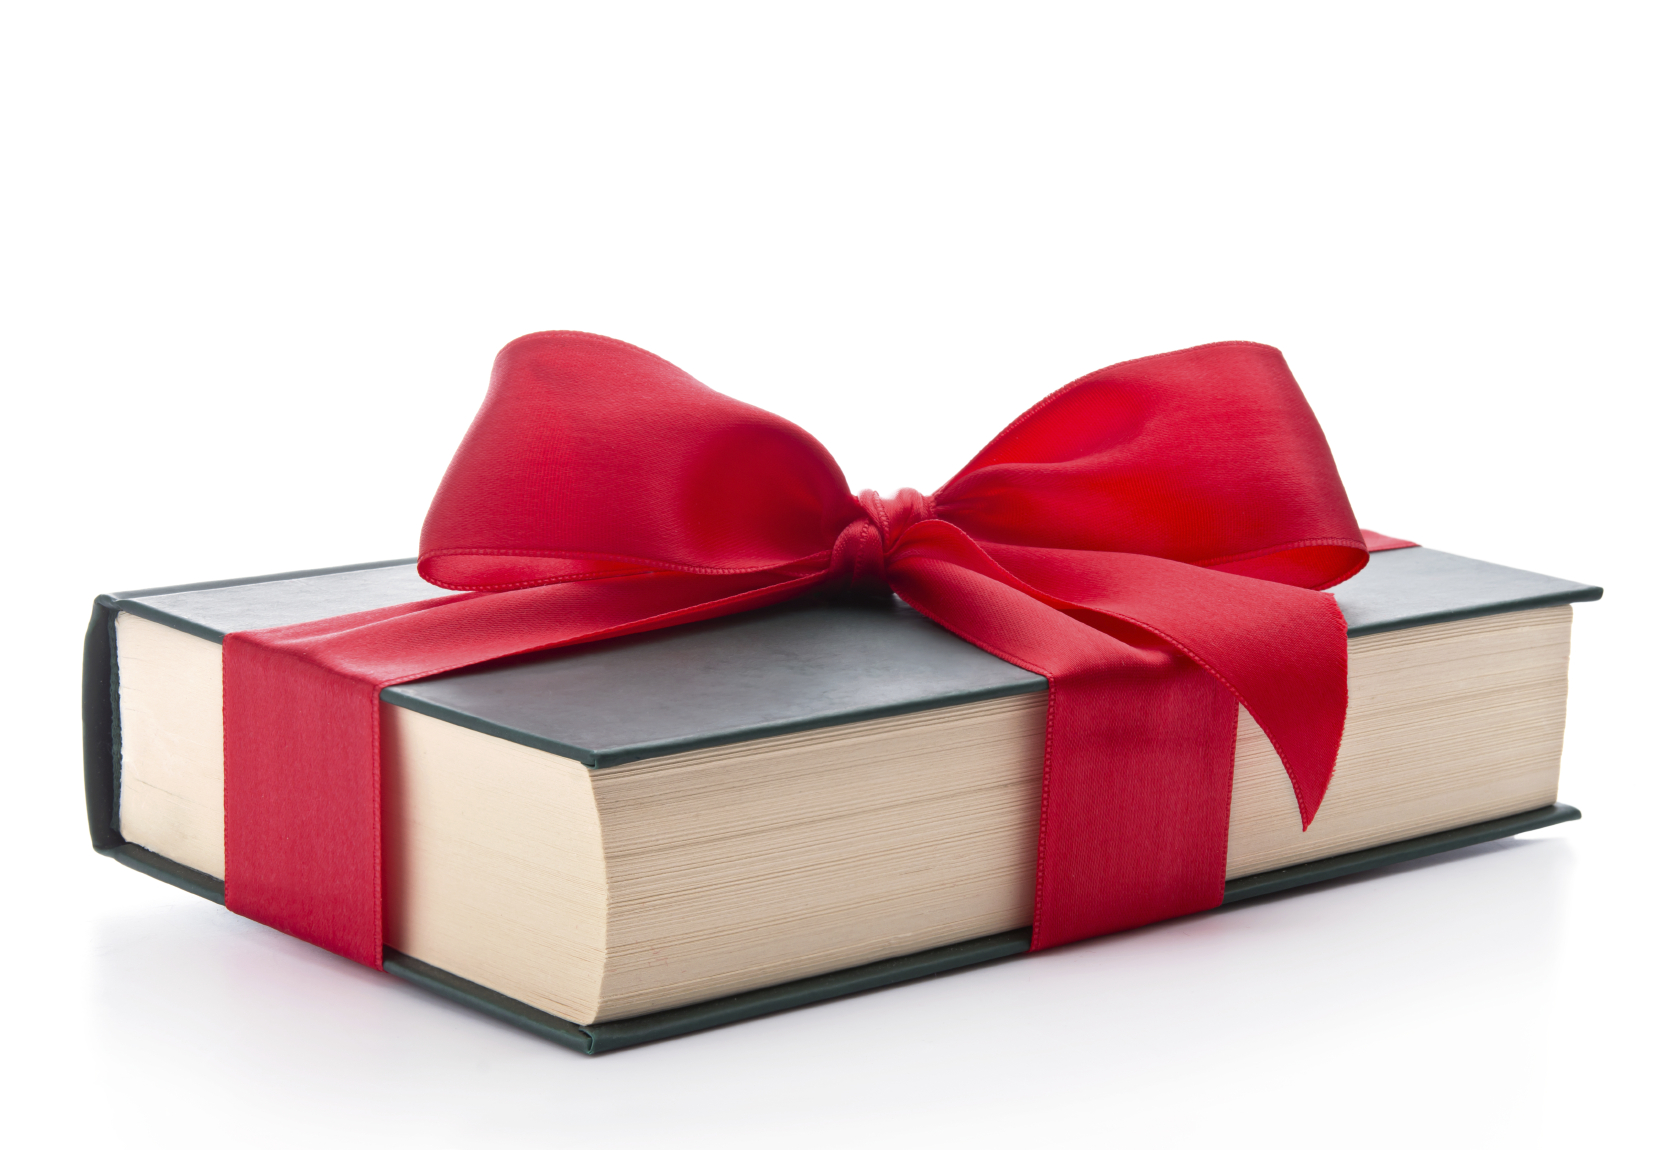 Book Gift Png - Book Gift Png Hdpng.com 1669, Transparent background PNG HD thumbnail